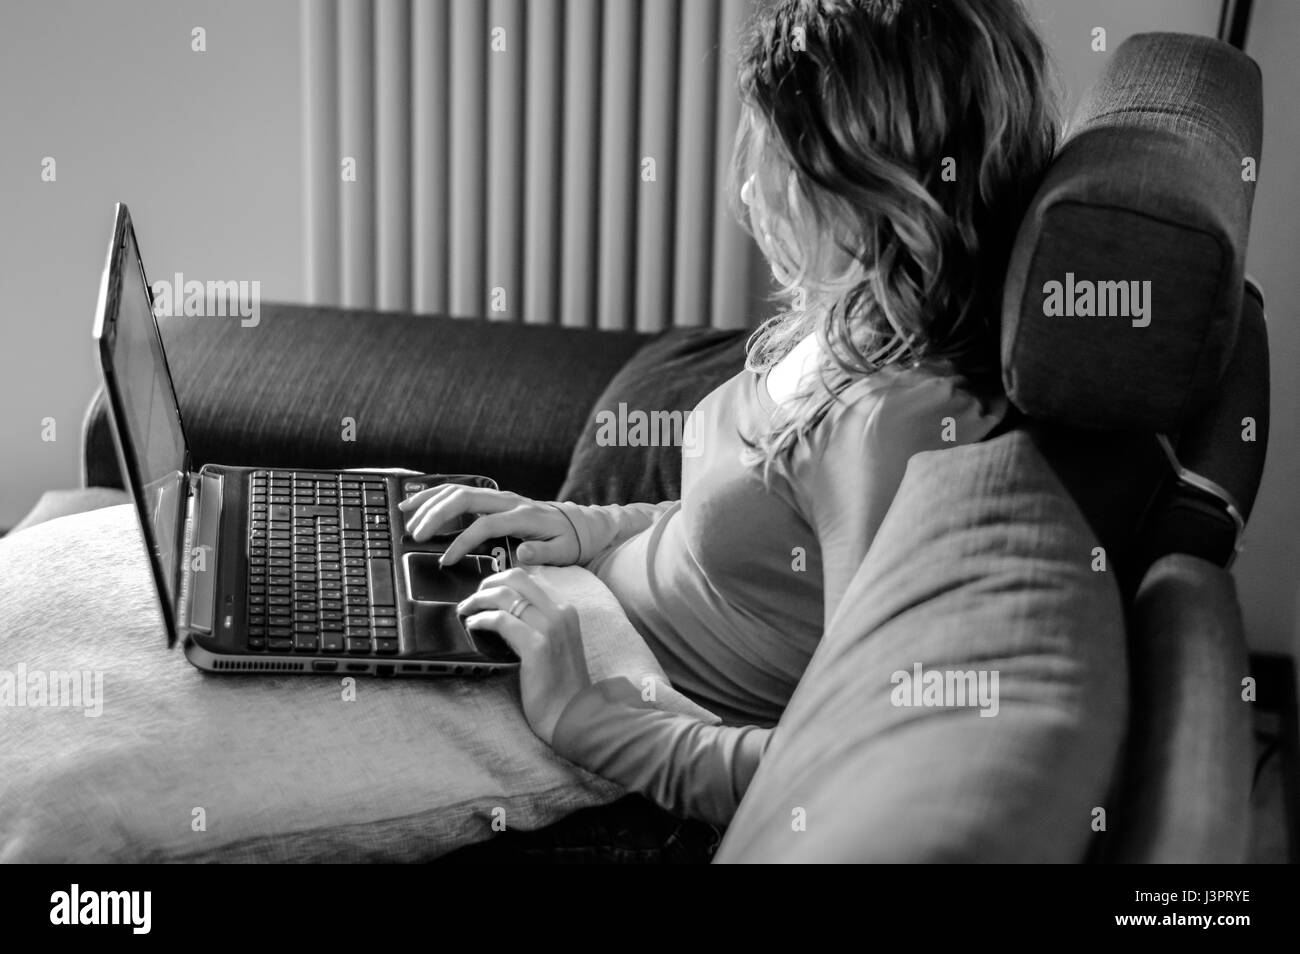 young woman working on laptop on the couch, black and white image Stock Photo